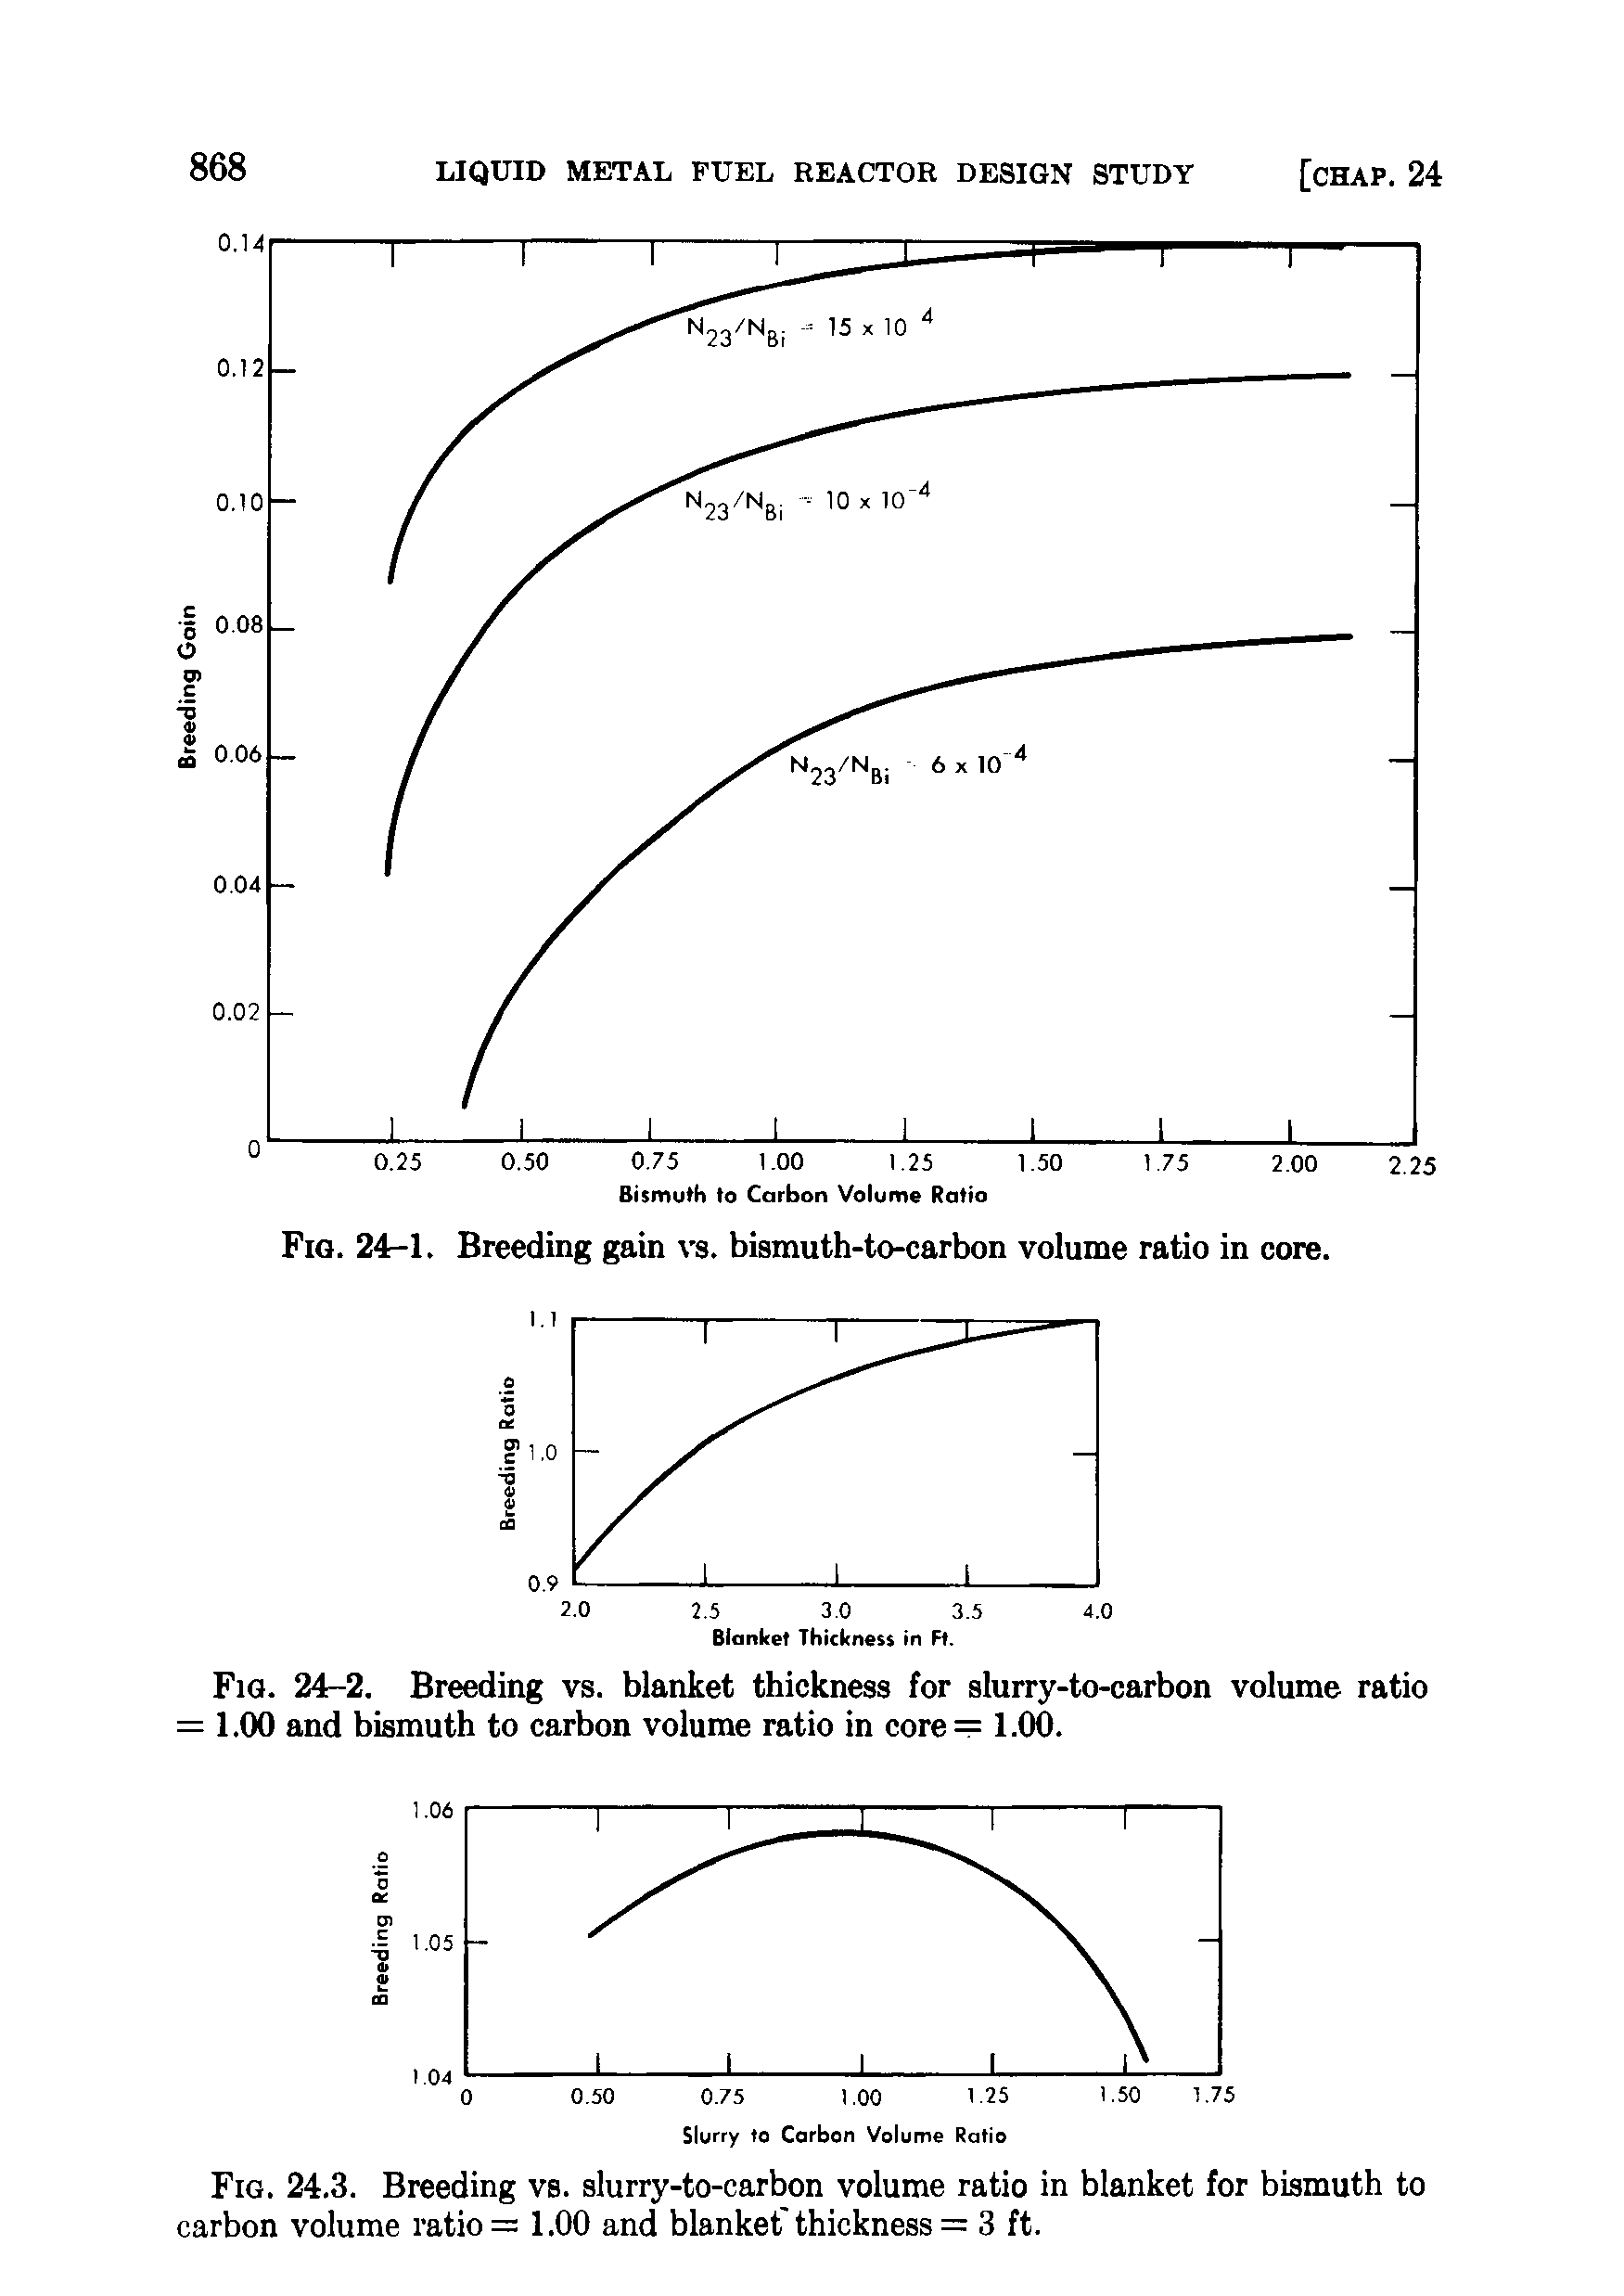 Fig. 24.3. Breeding vs. slurry-to-carbon volume ratio in blanket for bismuth to carbon volume ratio = 1.00 and blanket thickness = 3 ft.